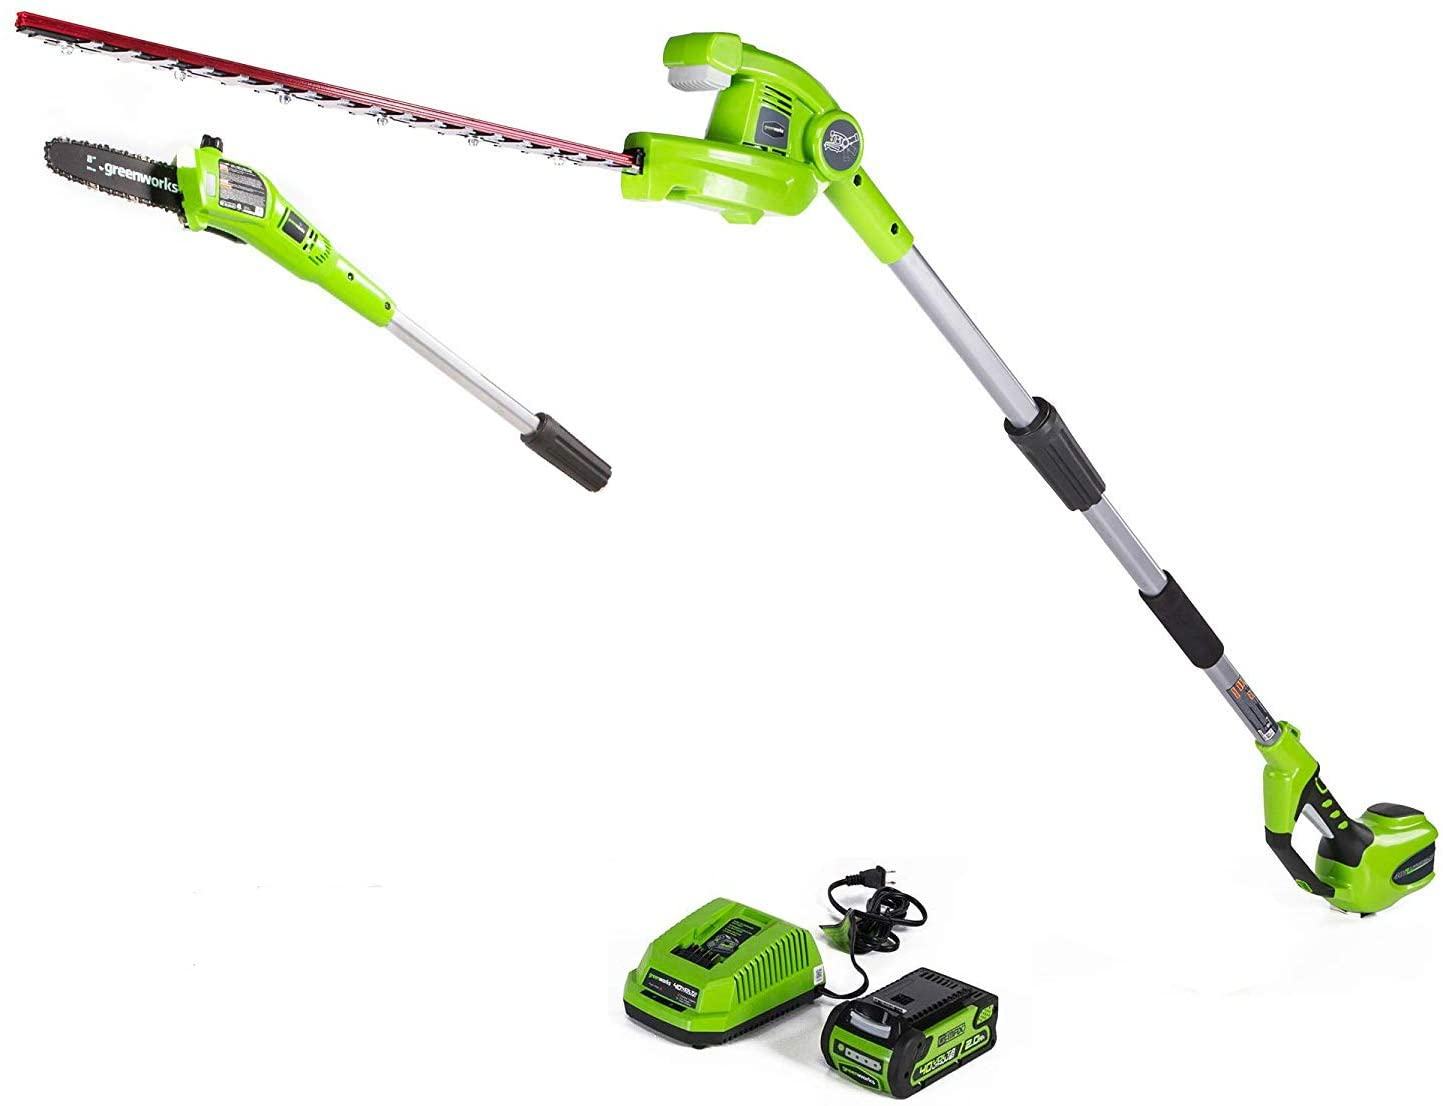 Greenworks 40V 8-inch Cordless Pole Saw with Hedge Trimmer Attachment 2.0Ah Battery and Charger Included $135 $134.25